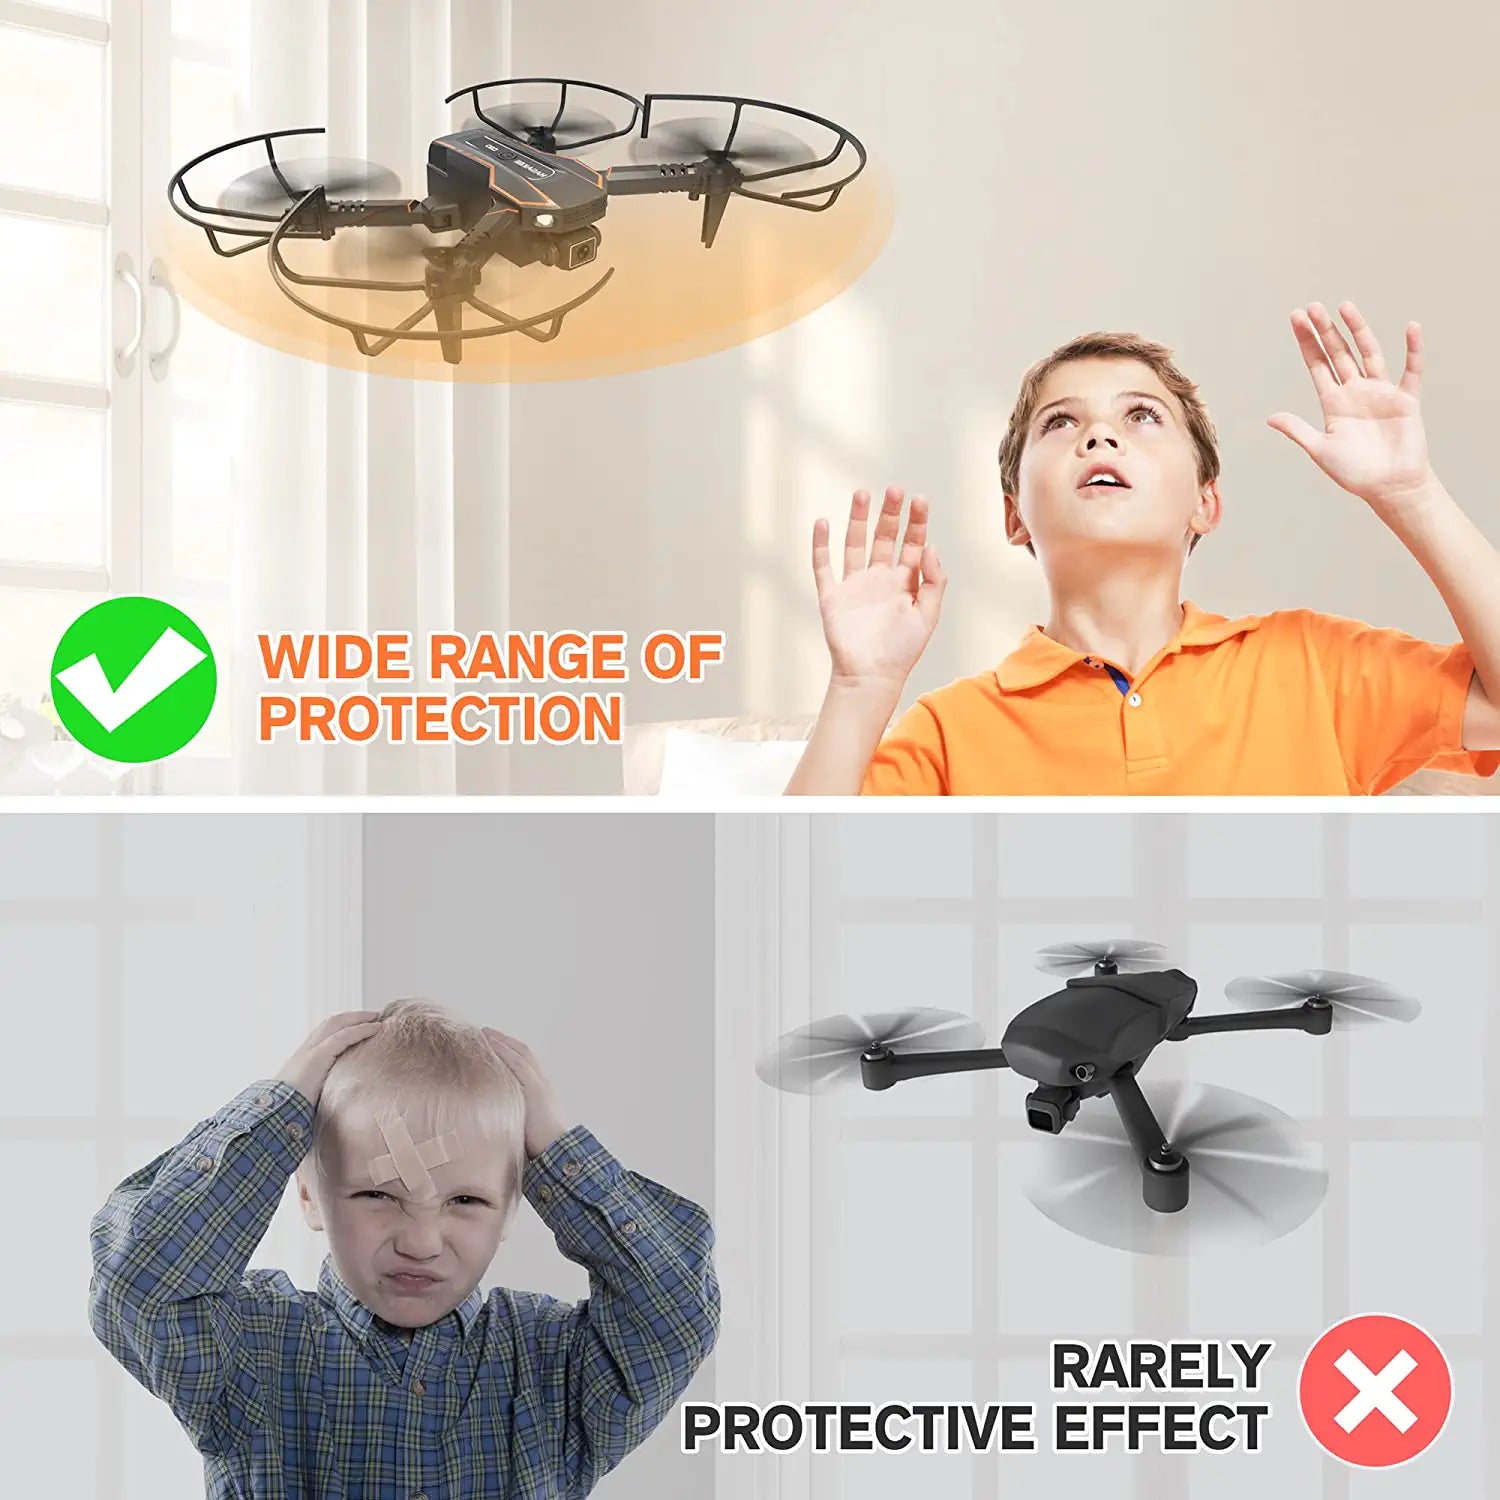 AVIALOGIC Mini Drone - with Camera for Kids, Remote Control Helicopter Toys Gifts for Boys Girls, FPV RC Quadcopter with 1080P HD Live Video Camera, Altitude Hold, Gravity Control, 2 Batteries - RCDrone